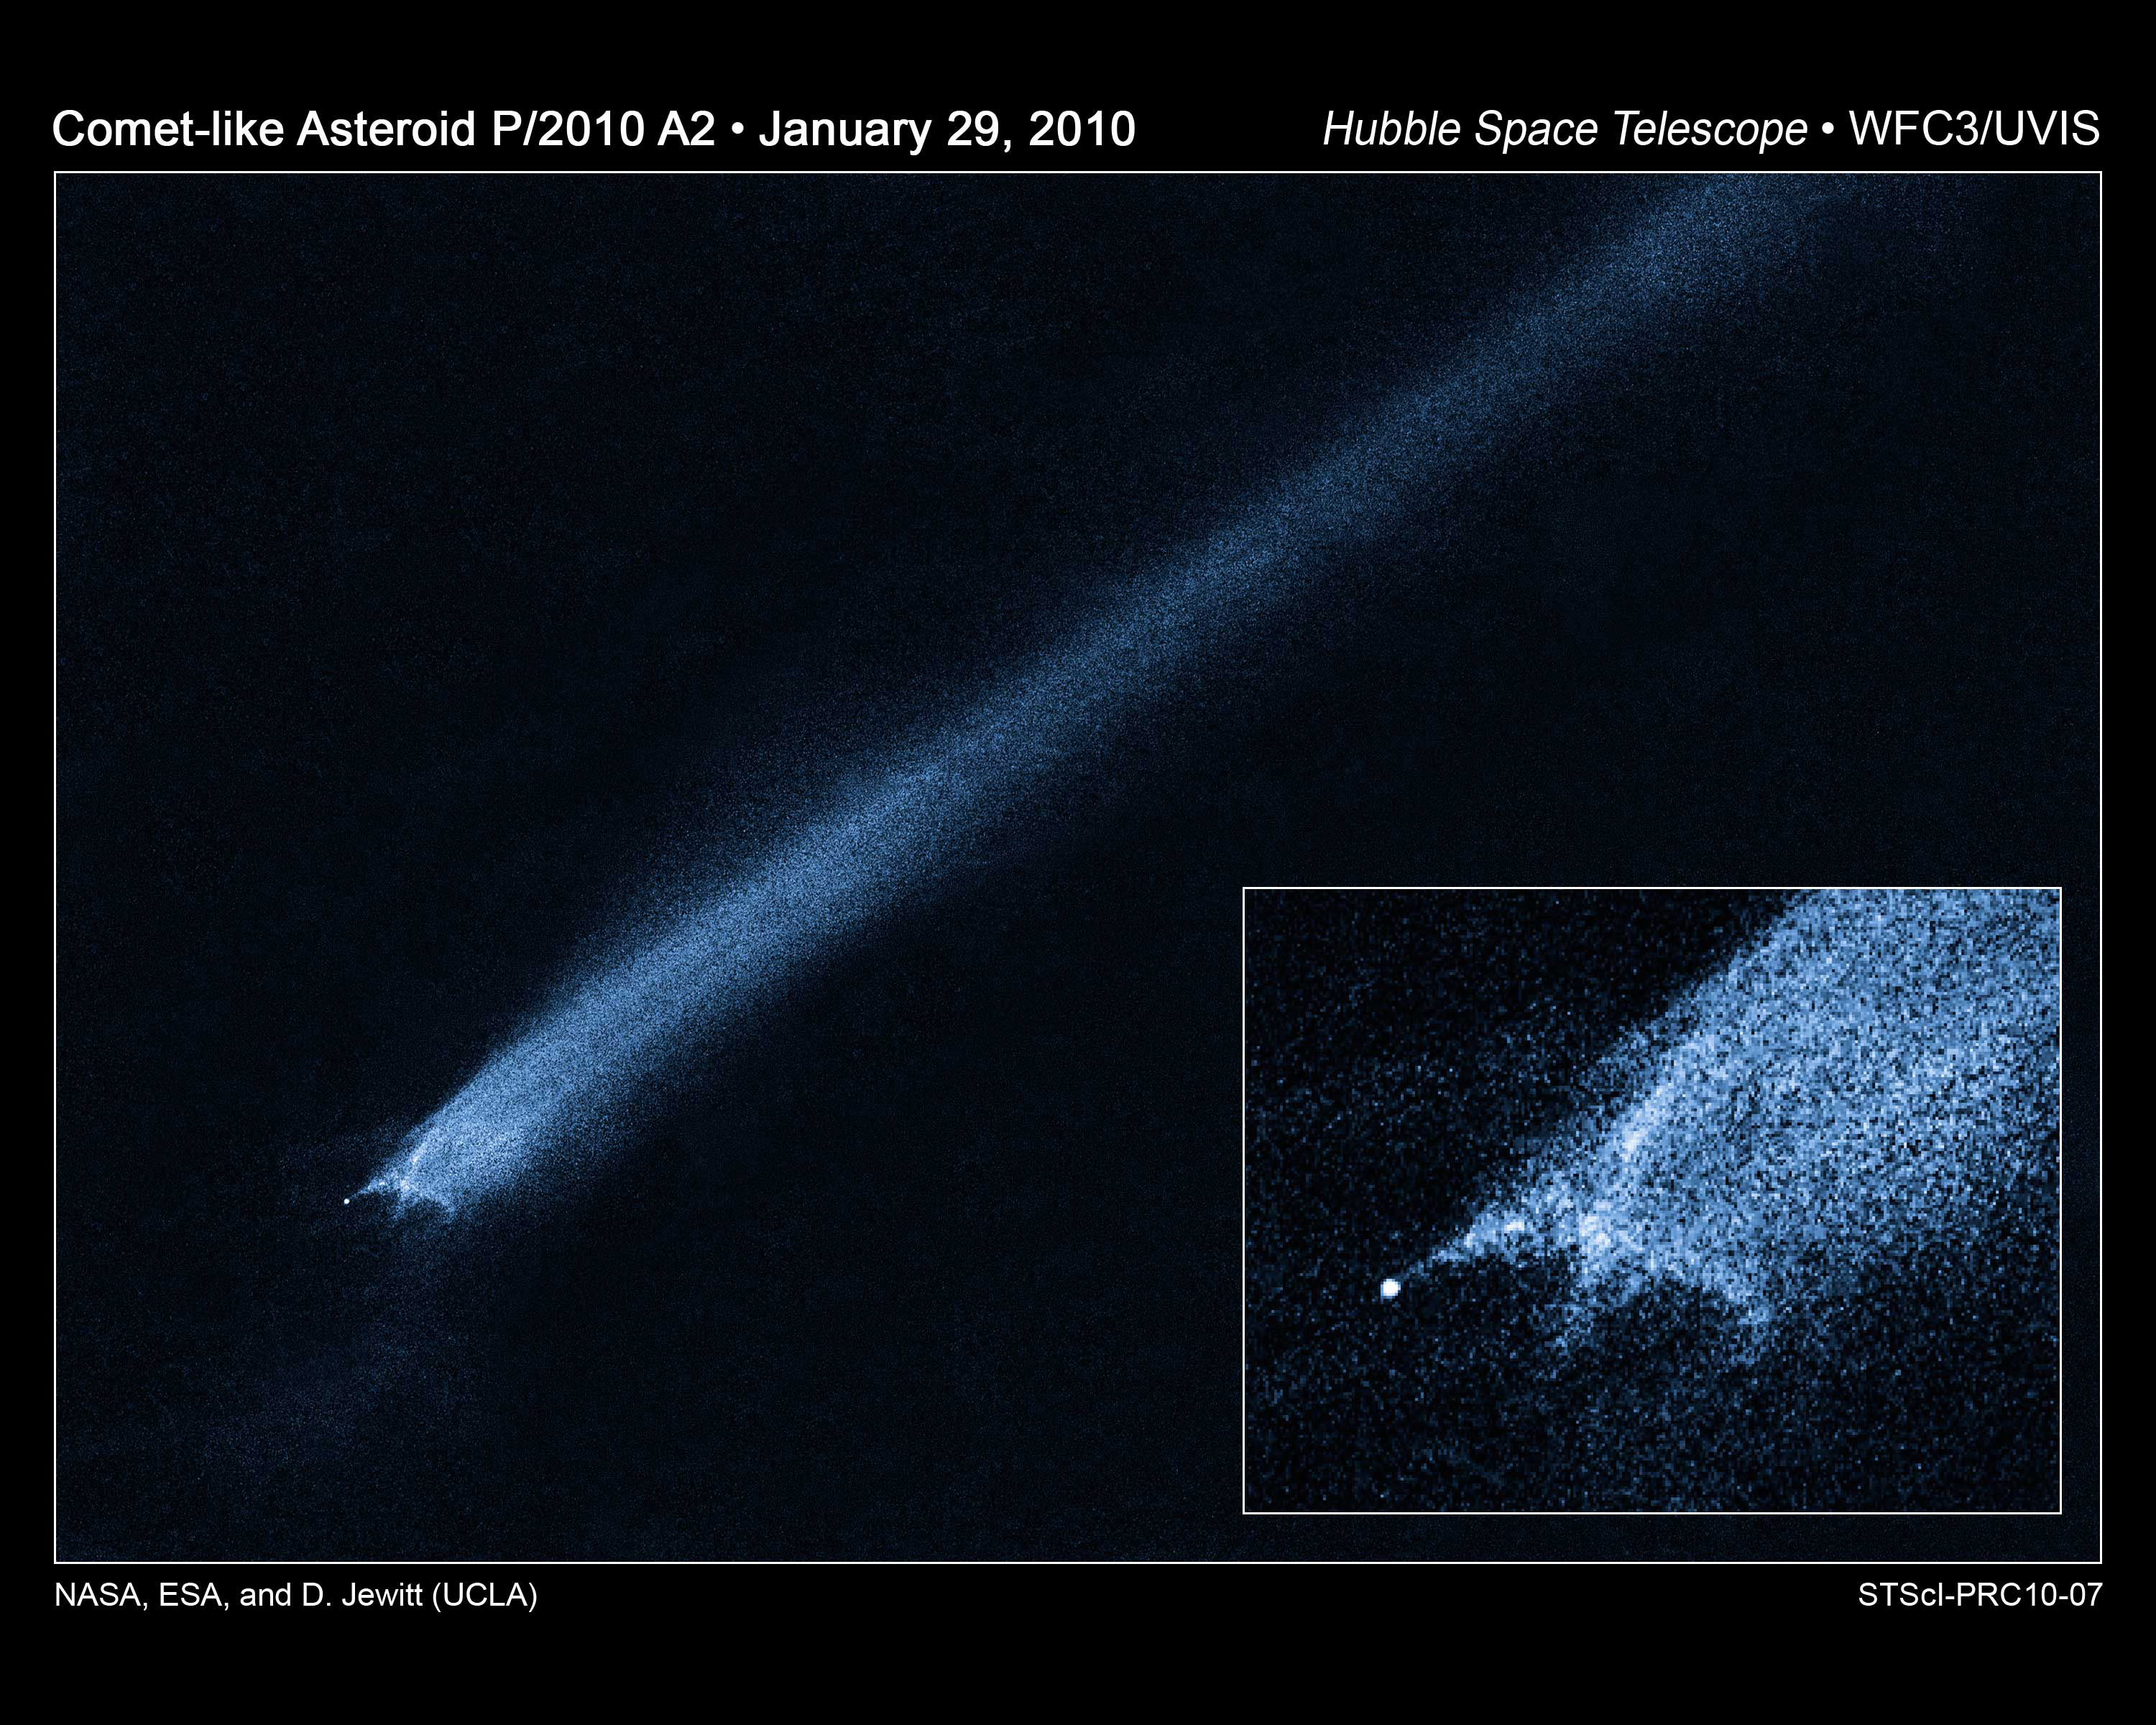 Image of asteroid trailing debris in space.